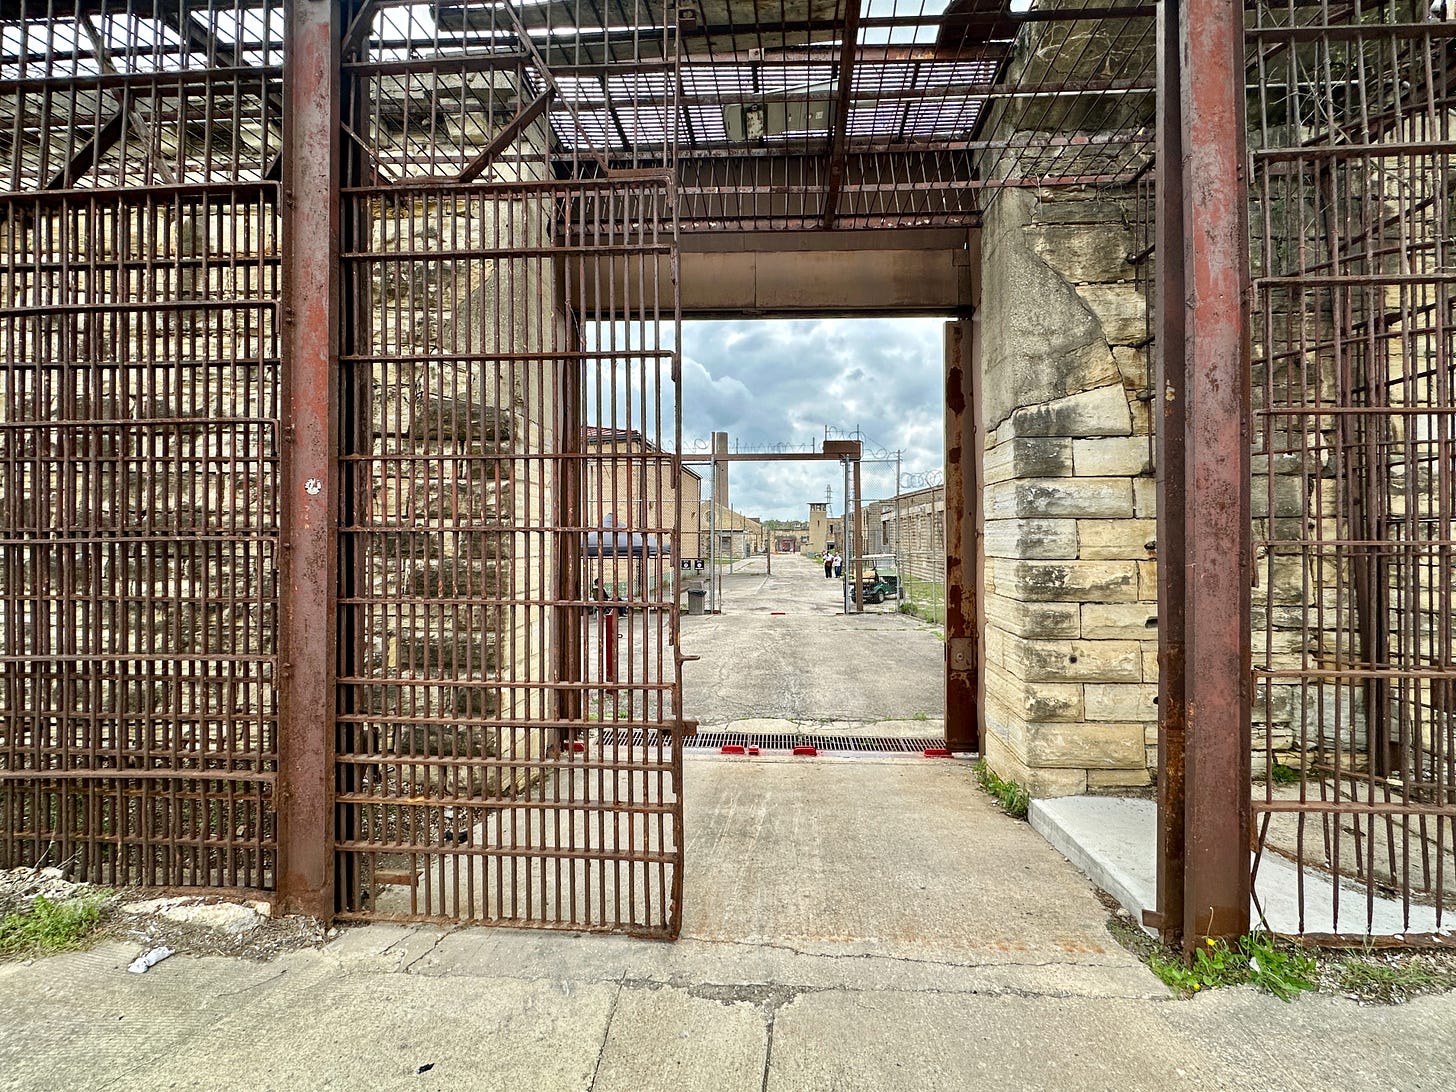 27 April 2024: The east gate at Old Joliet Prison. Enter at your own peril. 